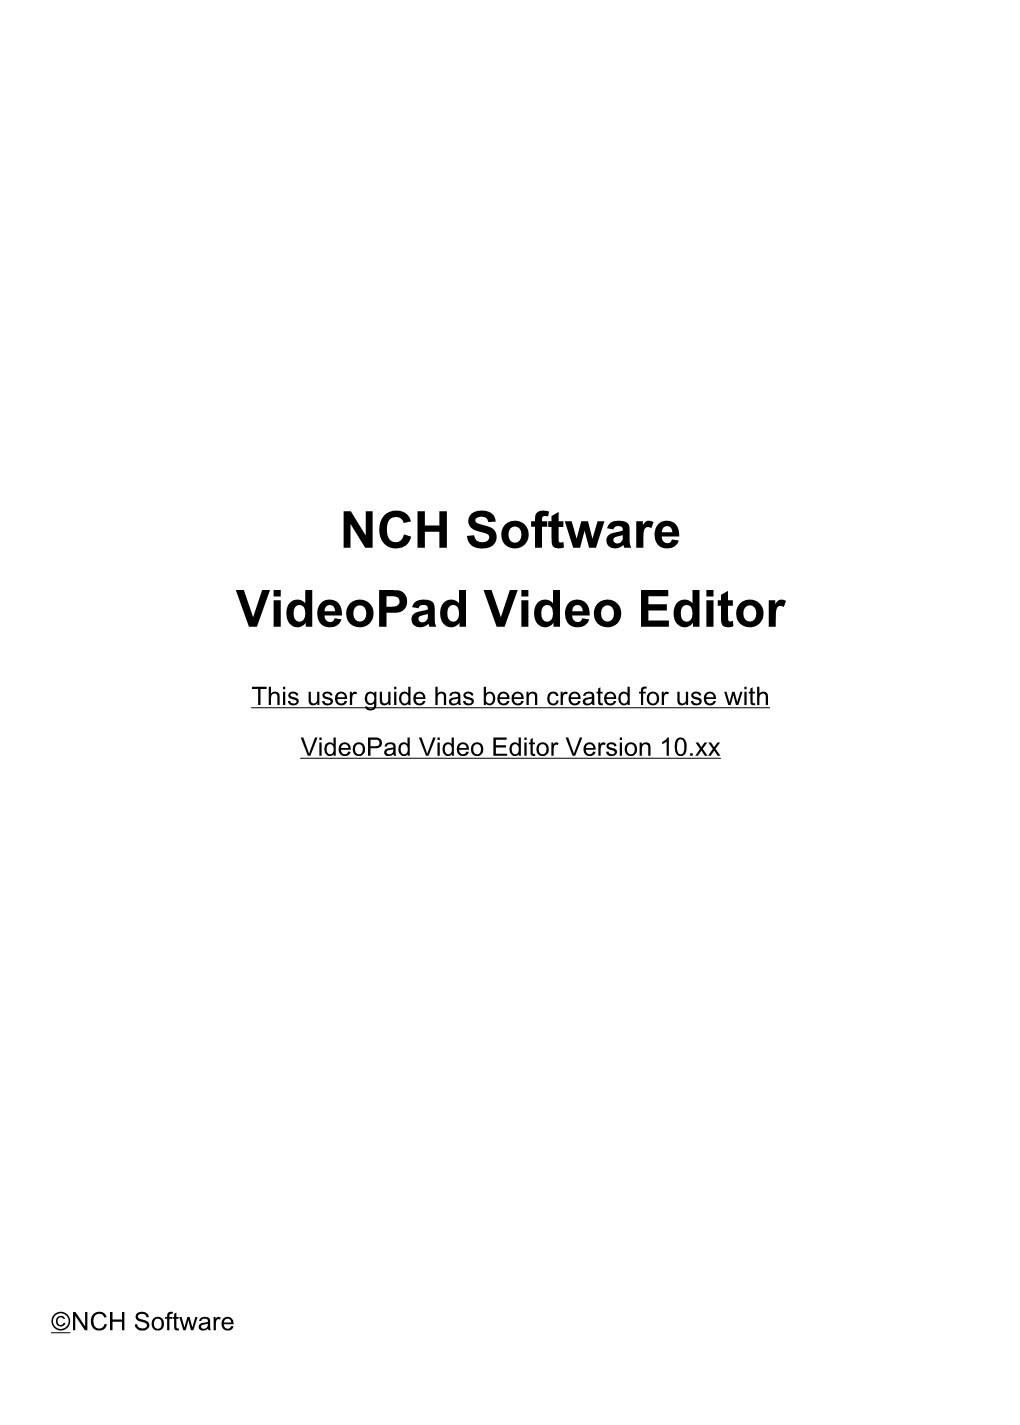 NCH Software Videopad Video Editor